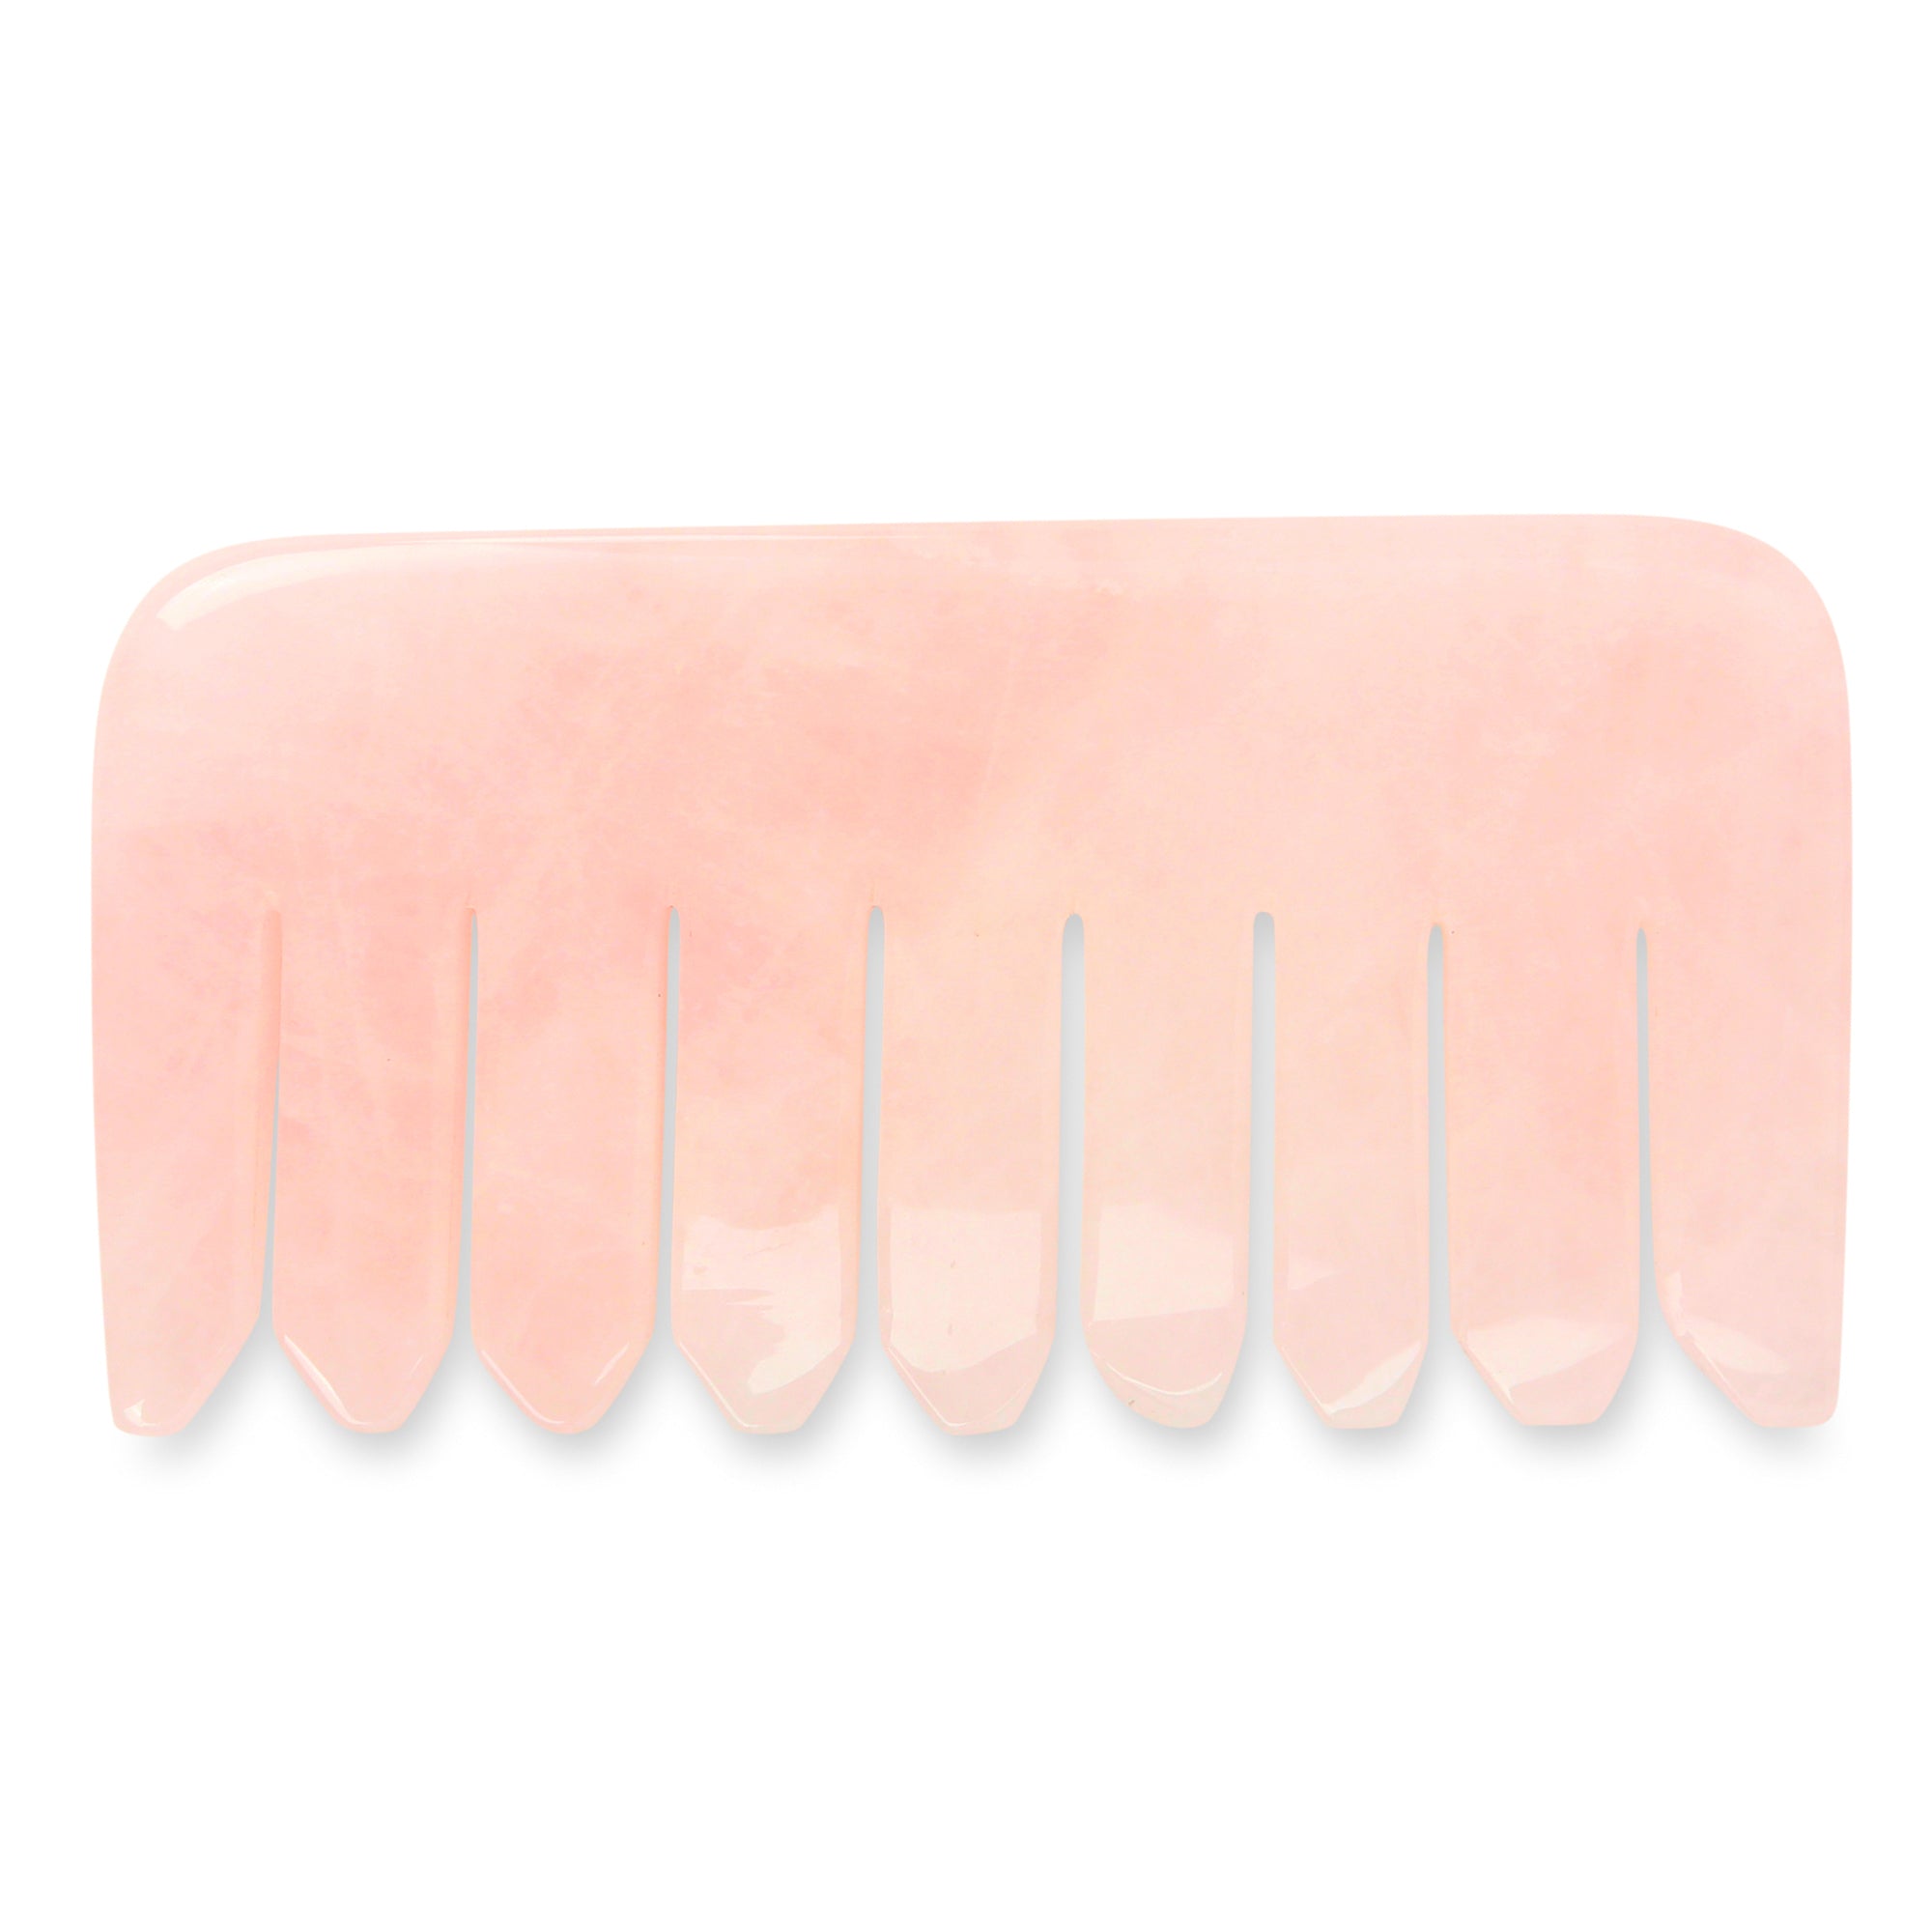 Rose Quartz Comb - Natural Chemical Free Crystal in a Signature Silk Lined Box